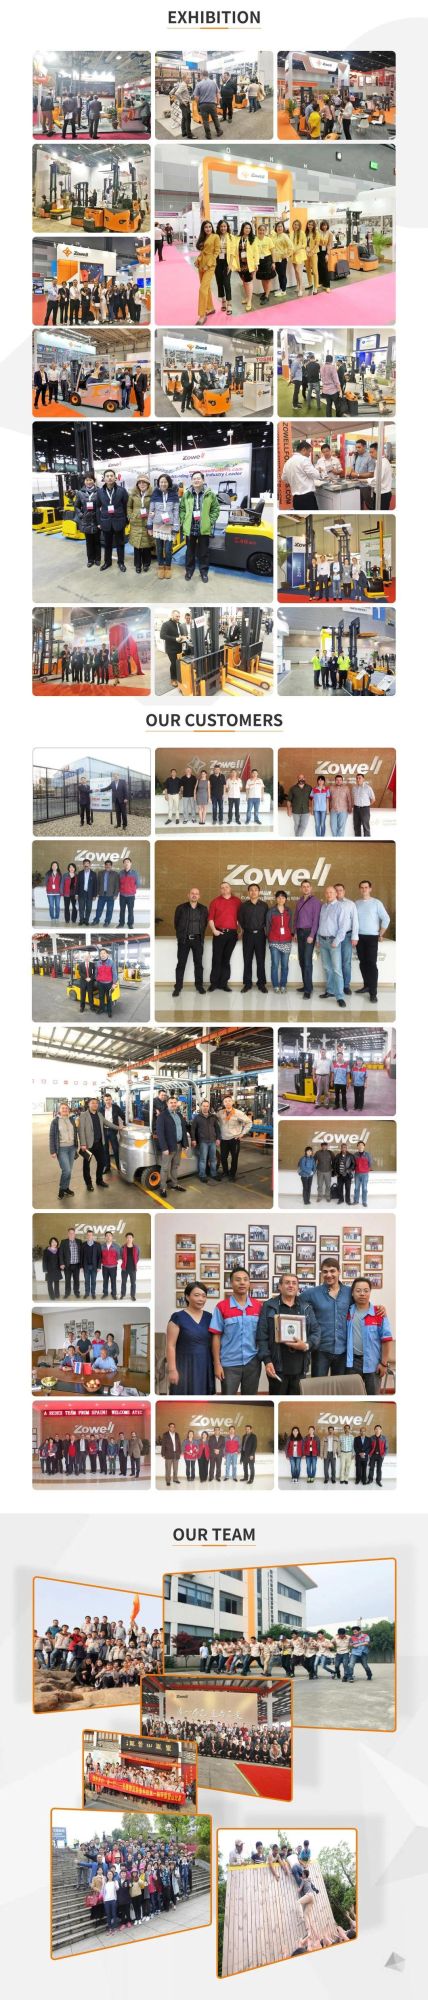 Wooden Powered Zowell Suzhou, China Electric 12ton Pallet Truck XP120